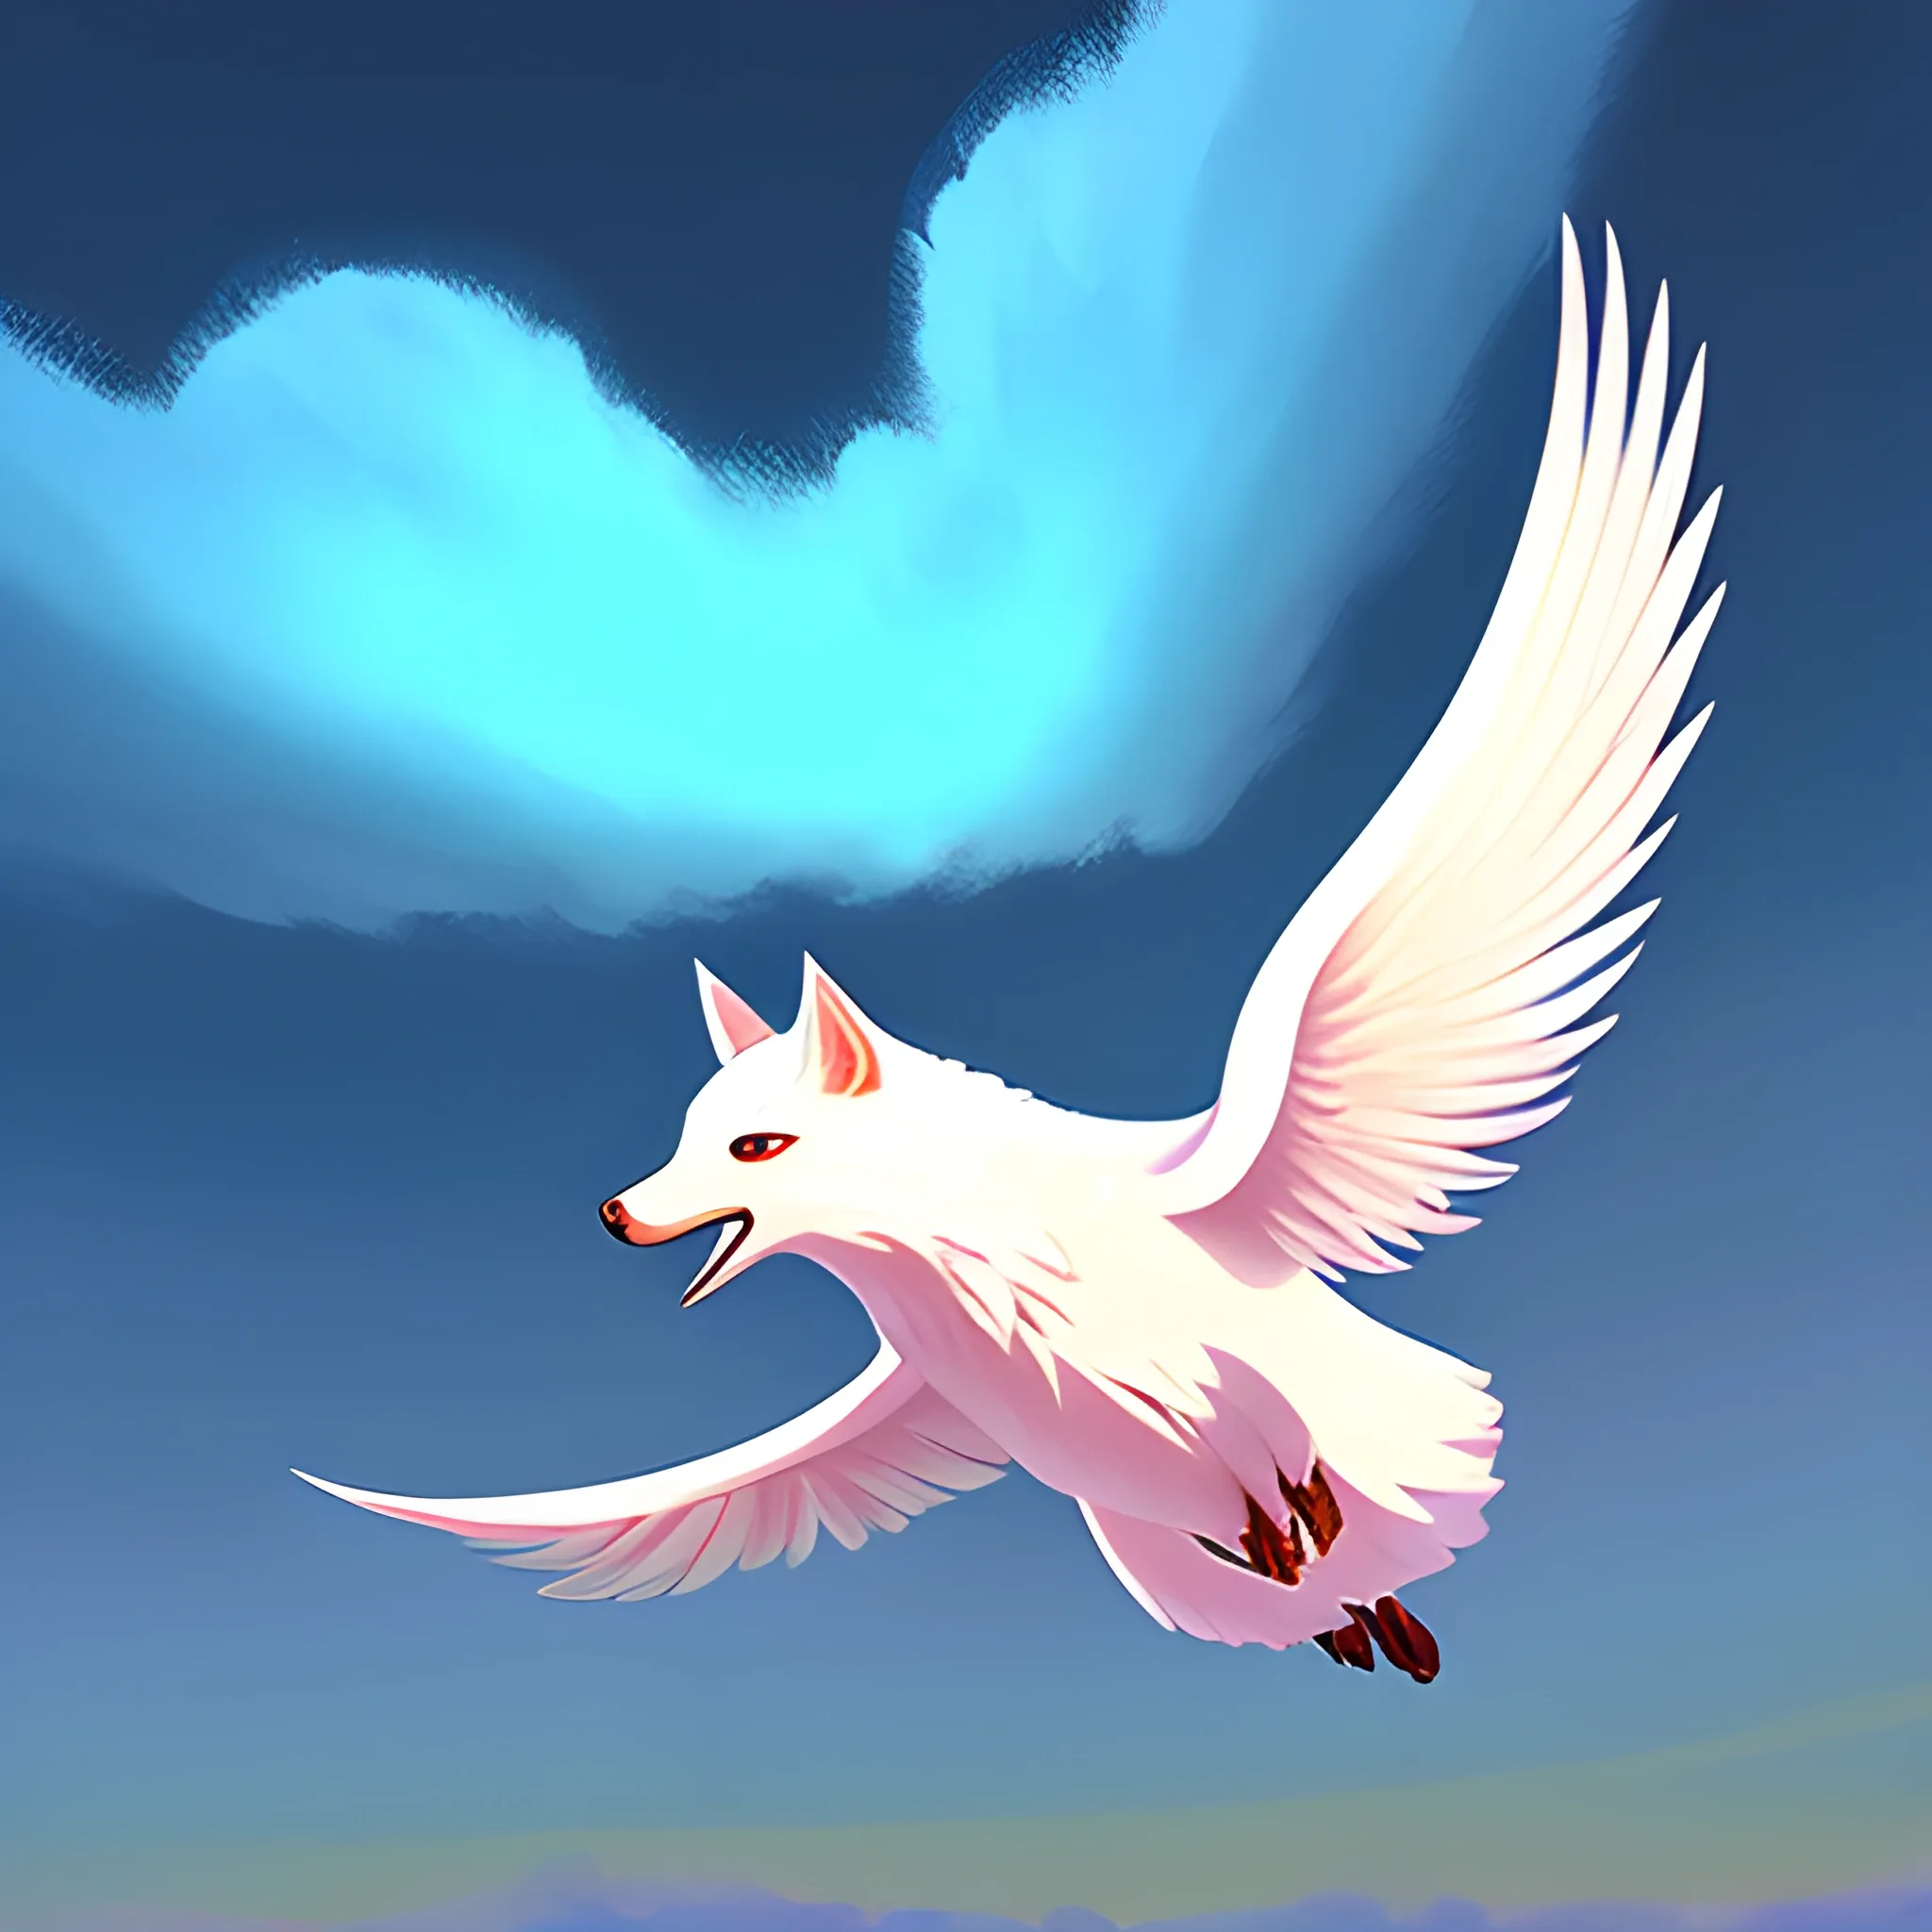 a little fluff flying through the skies, digital painting style in cool and warm colors